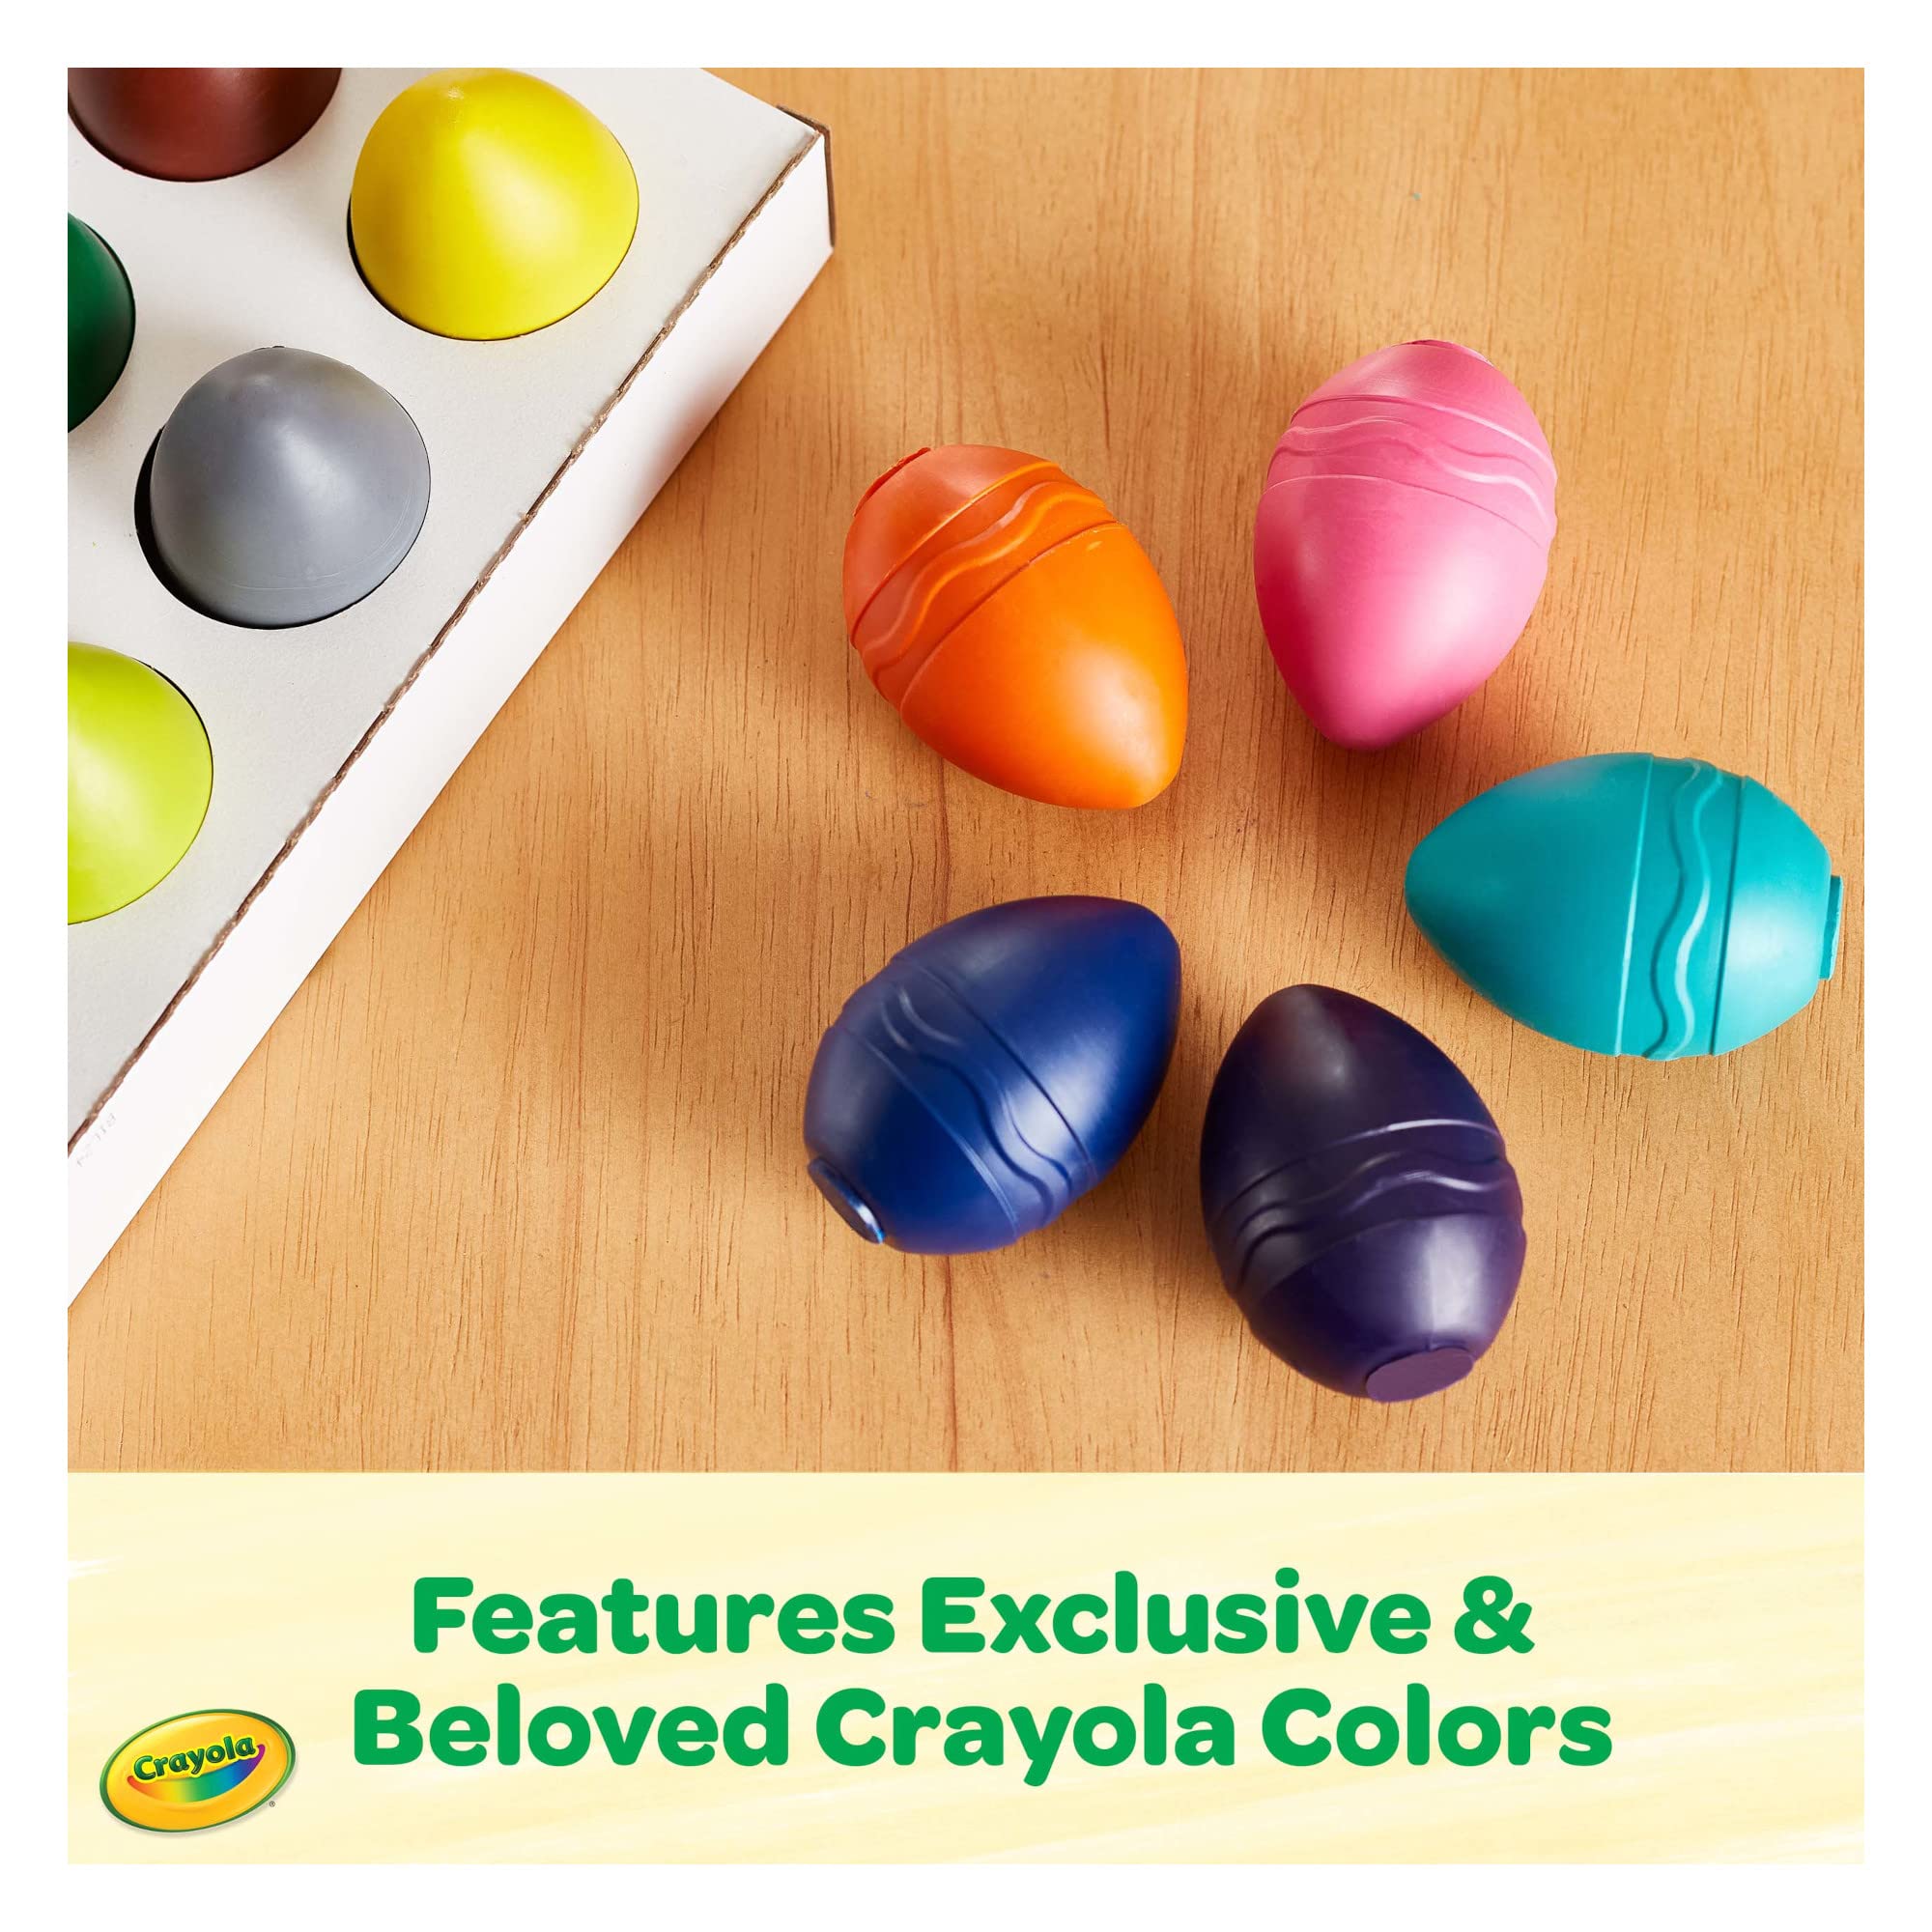 Crayola Washable Palm-Grasp Crayons, Pack of 12